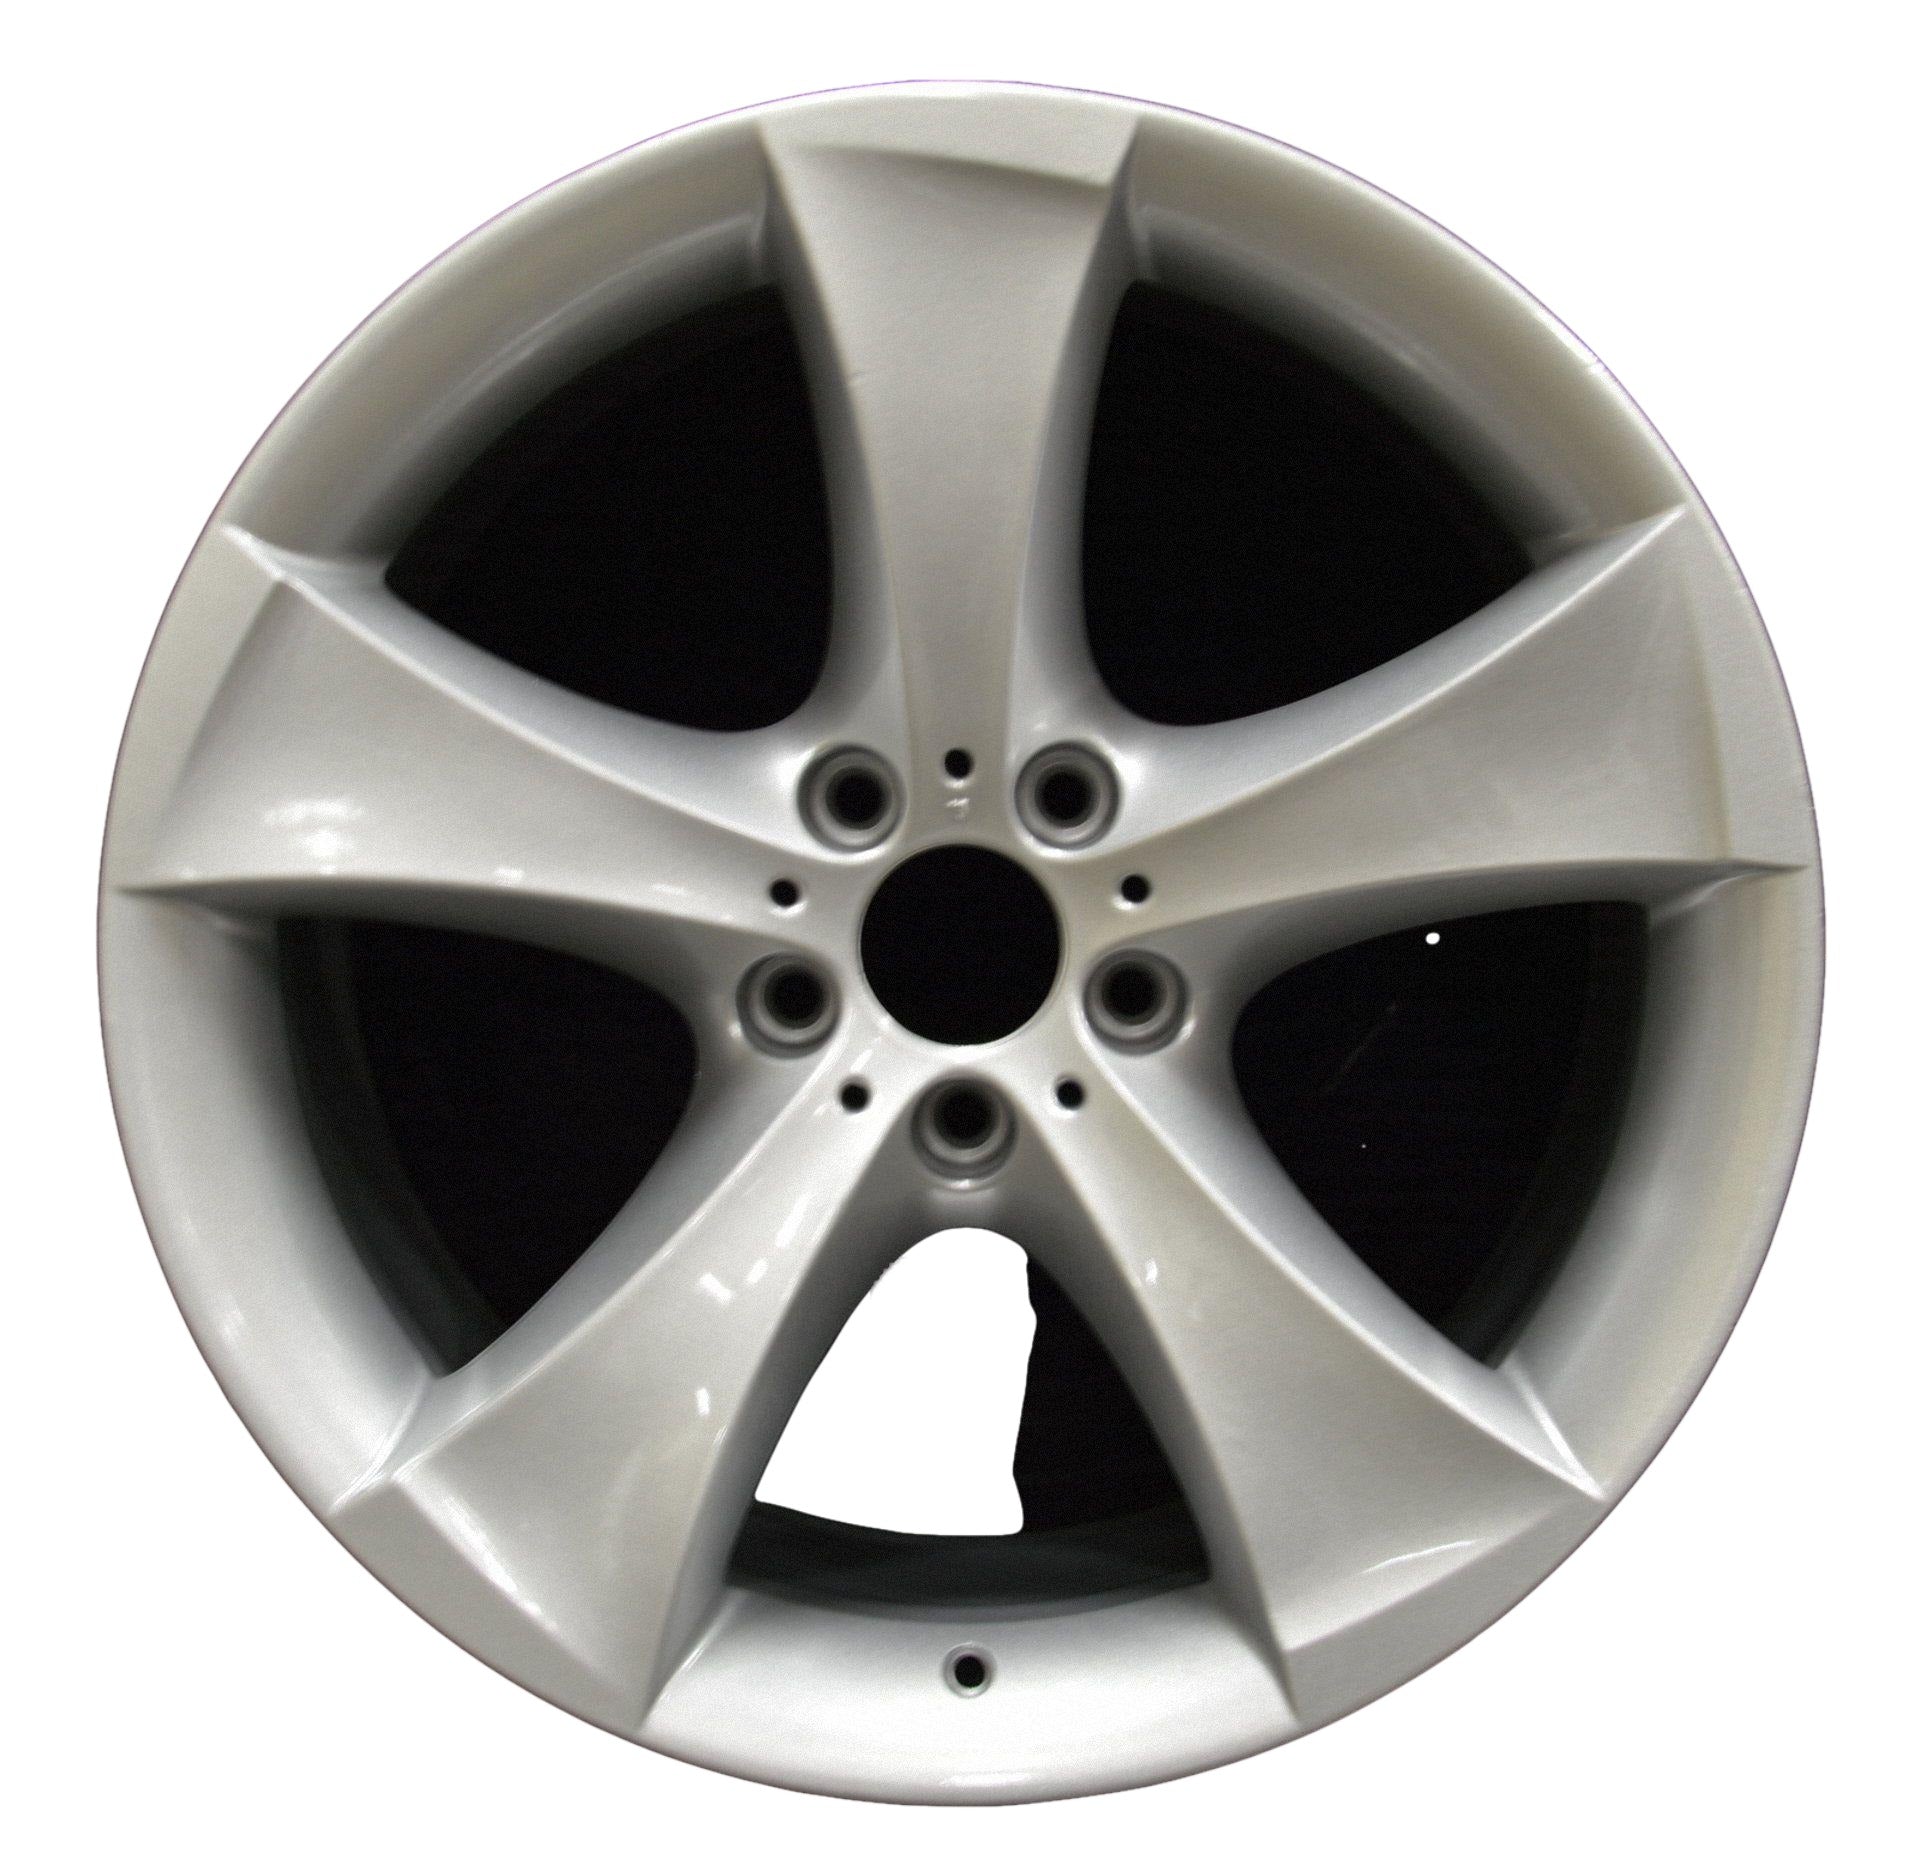 BMW X5M  2010, 2011, 2012, 2013, 2014 Factory OEM Car Wheel Size 20x10 Alloy WAO.71290FT.PS02.FF